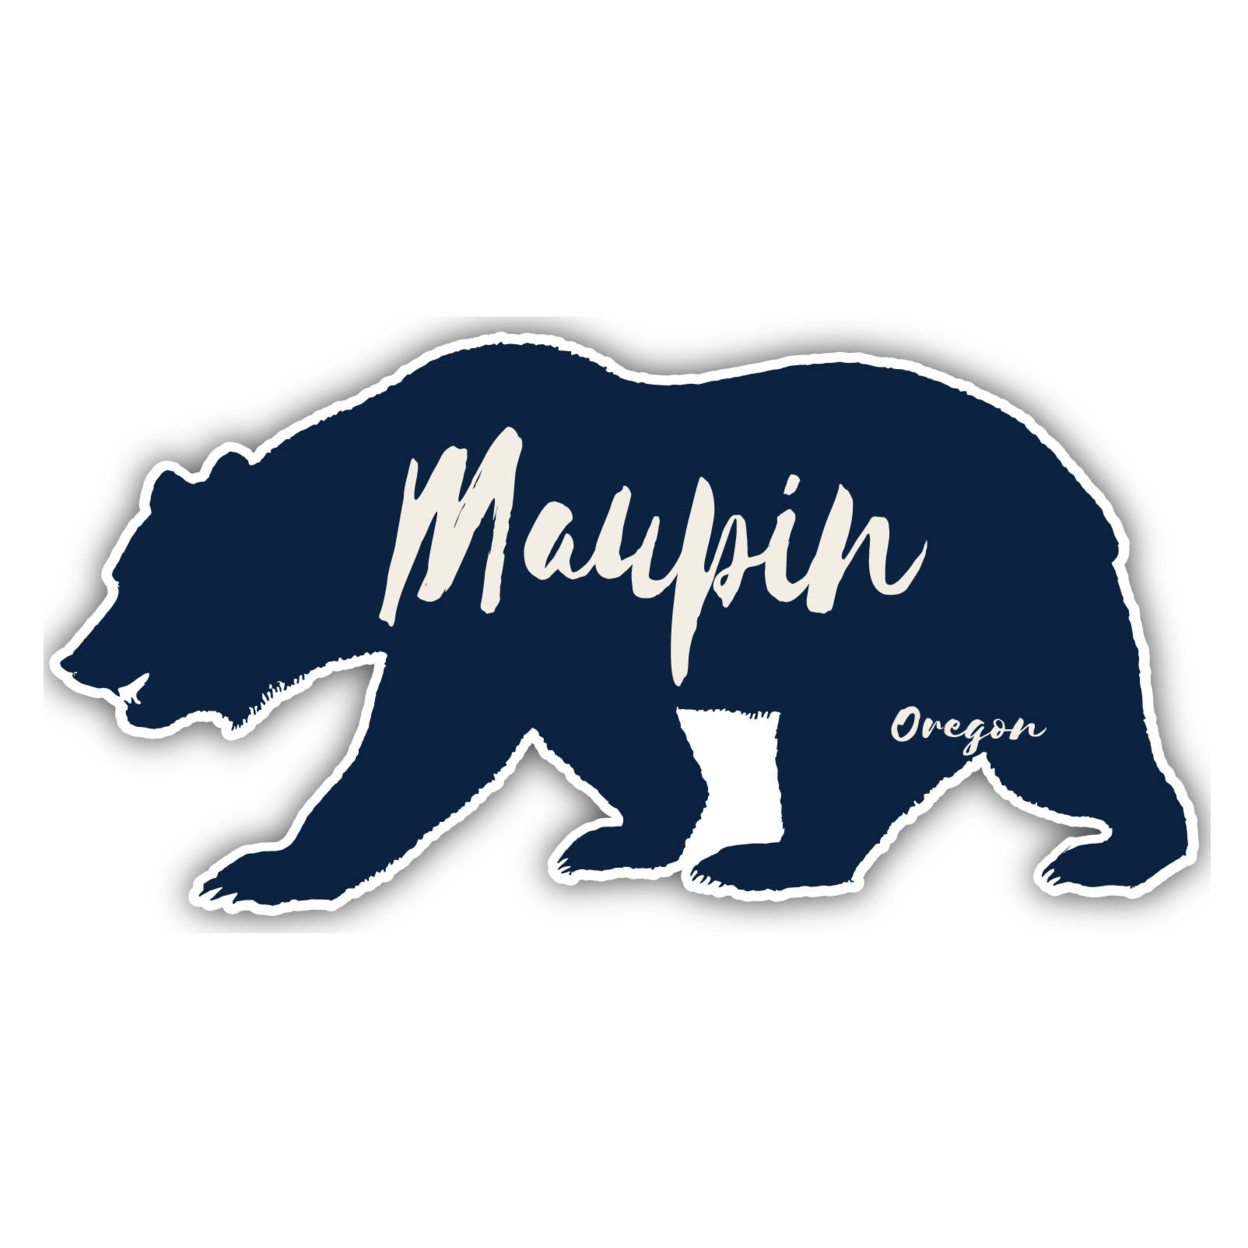 Maupin Oregon Souvenir Decorative Stickers (Choose Theme And Size) - 4-Inch, Great Outdoors